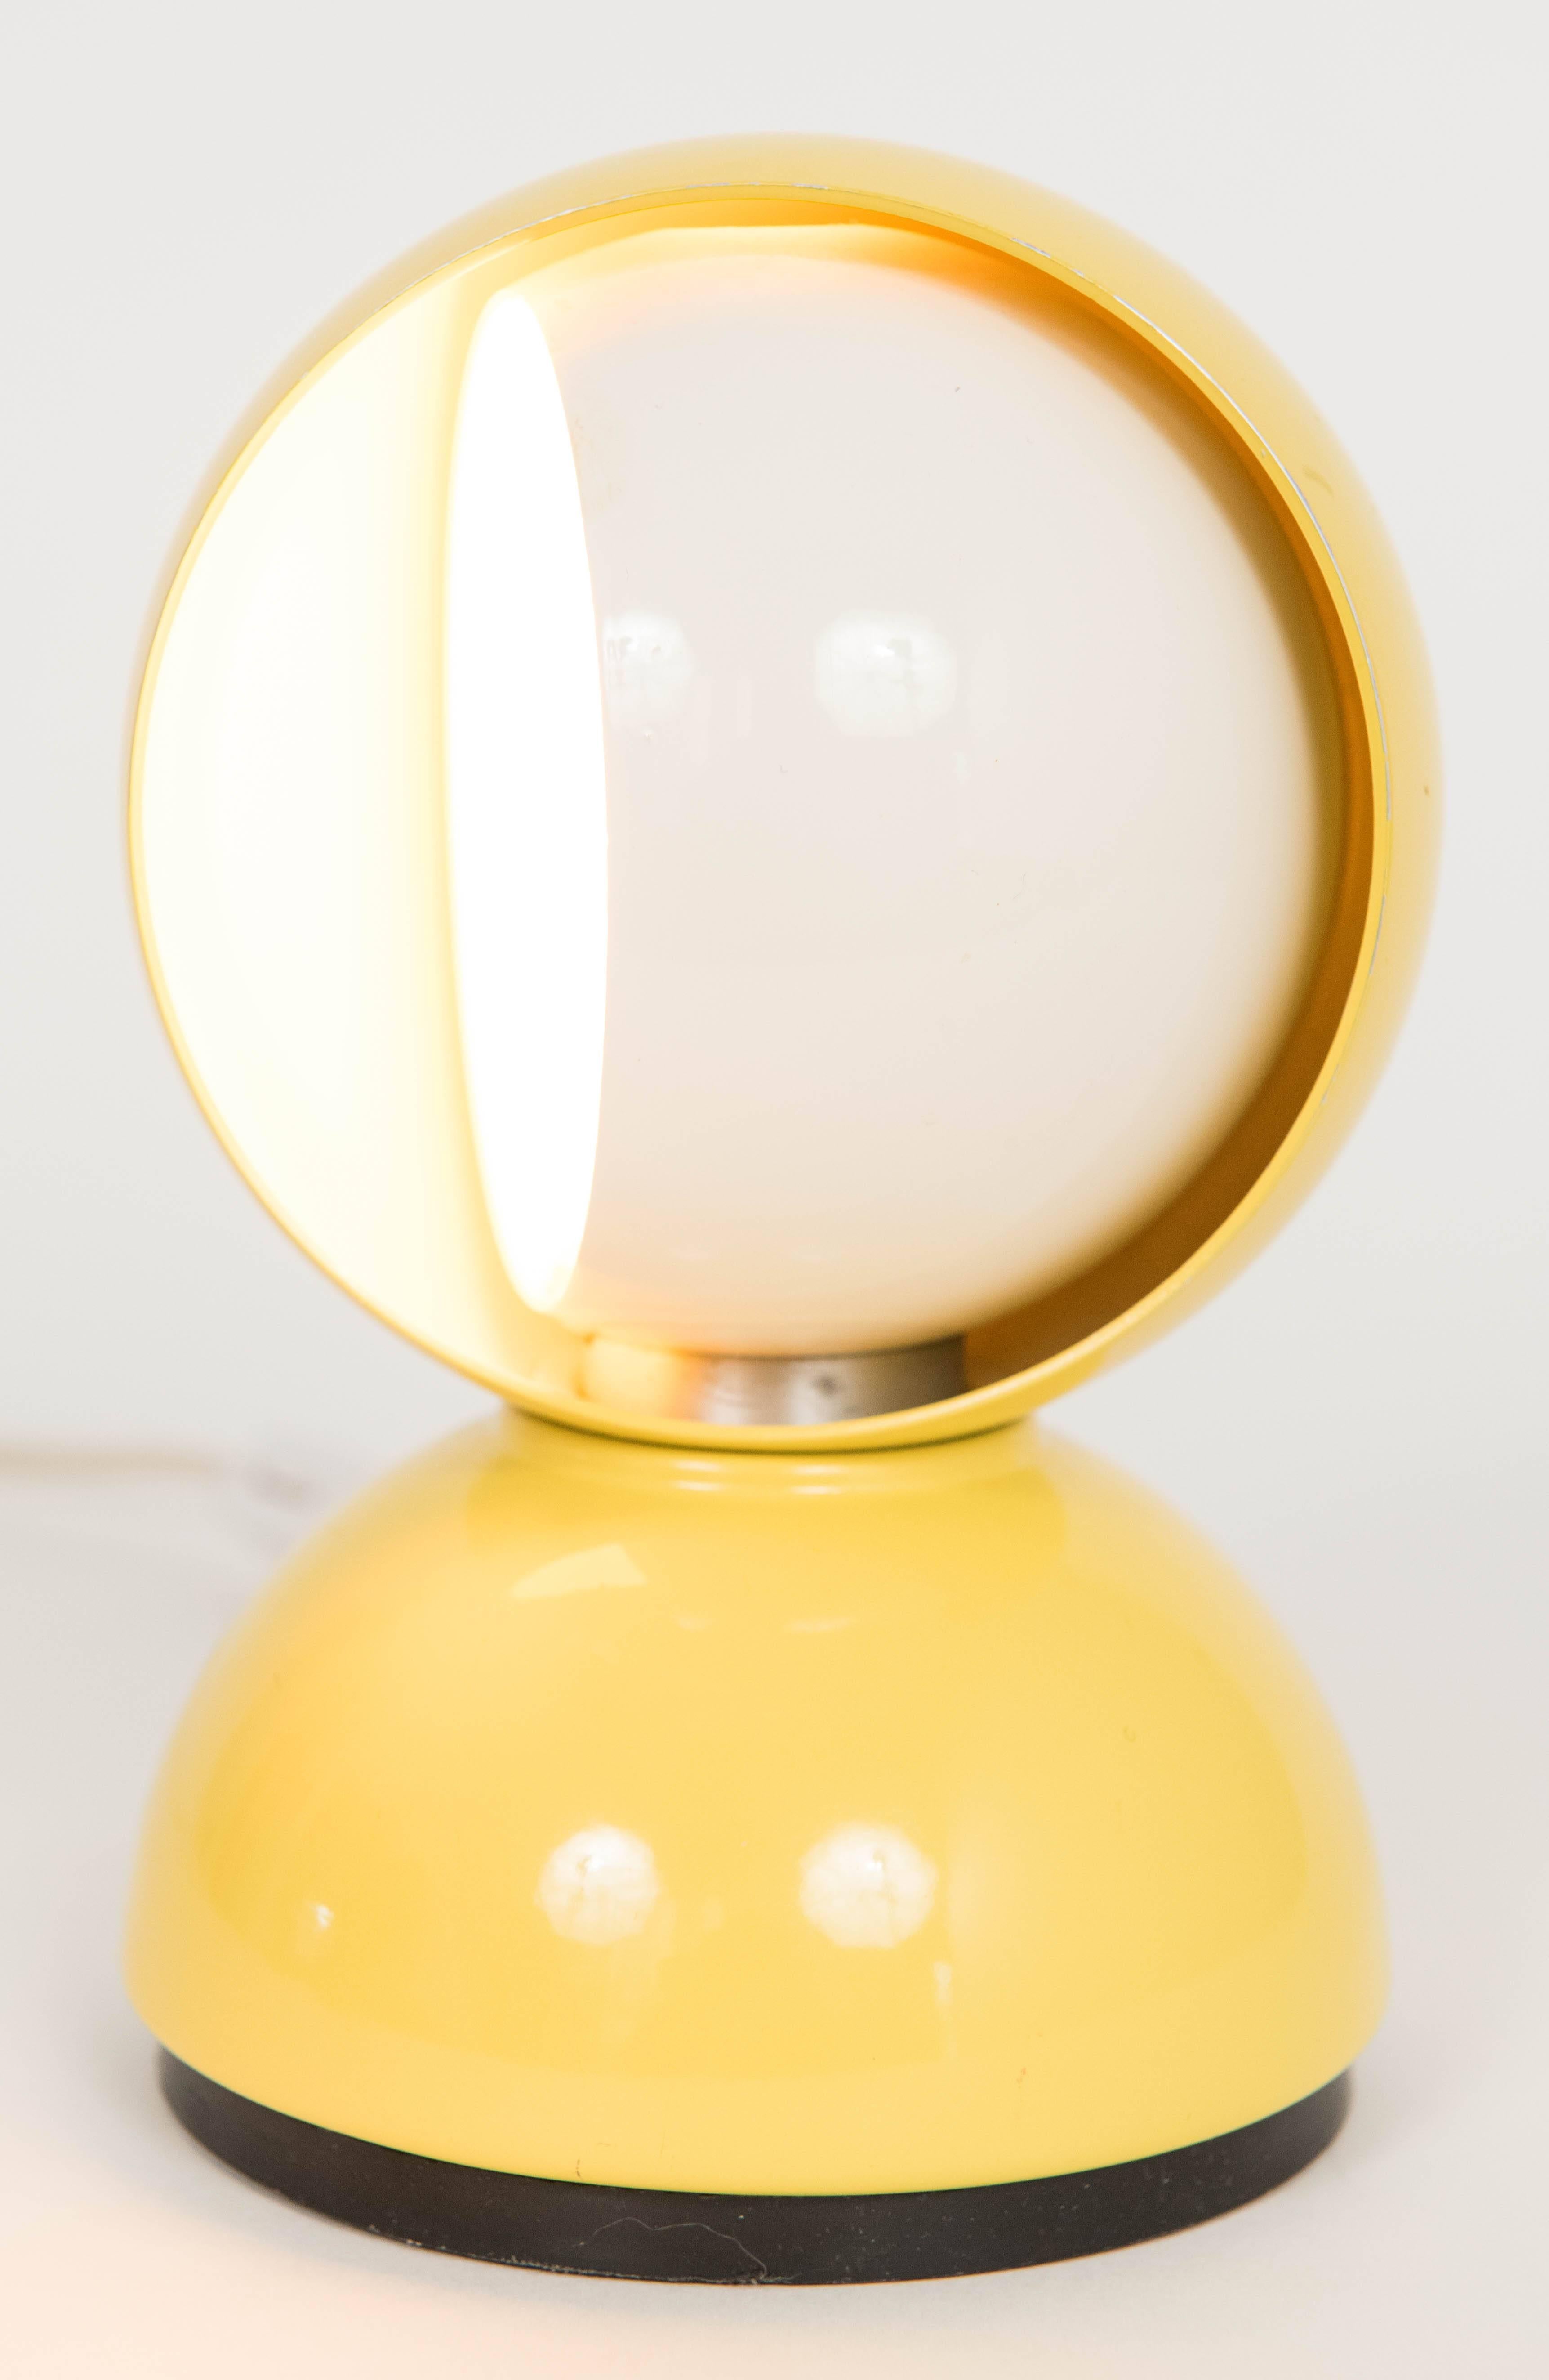 Yellow and white standing or wall mounted eclisse lamp designed by Vico Magistretti for Artemide.